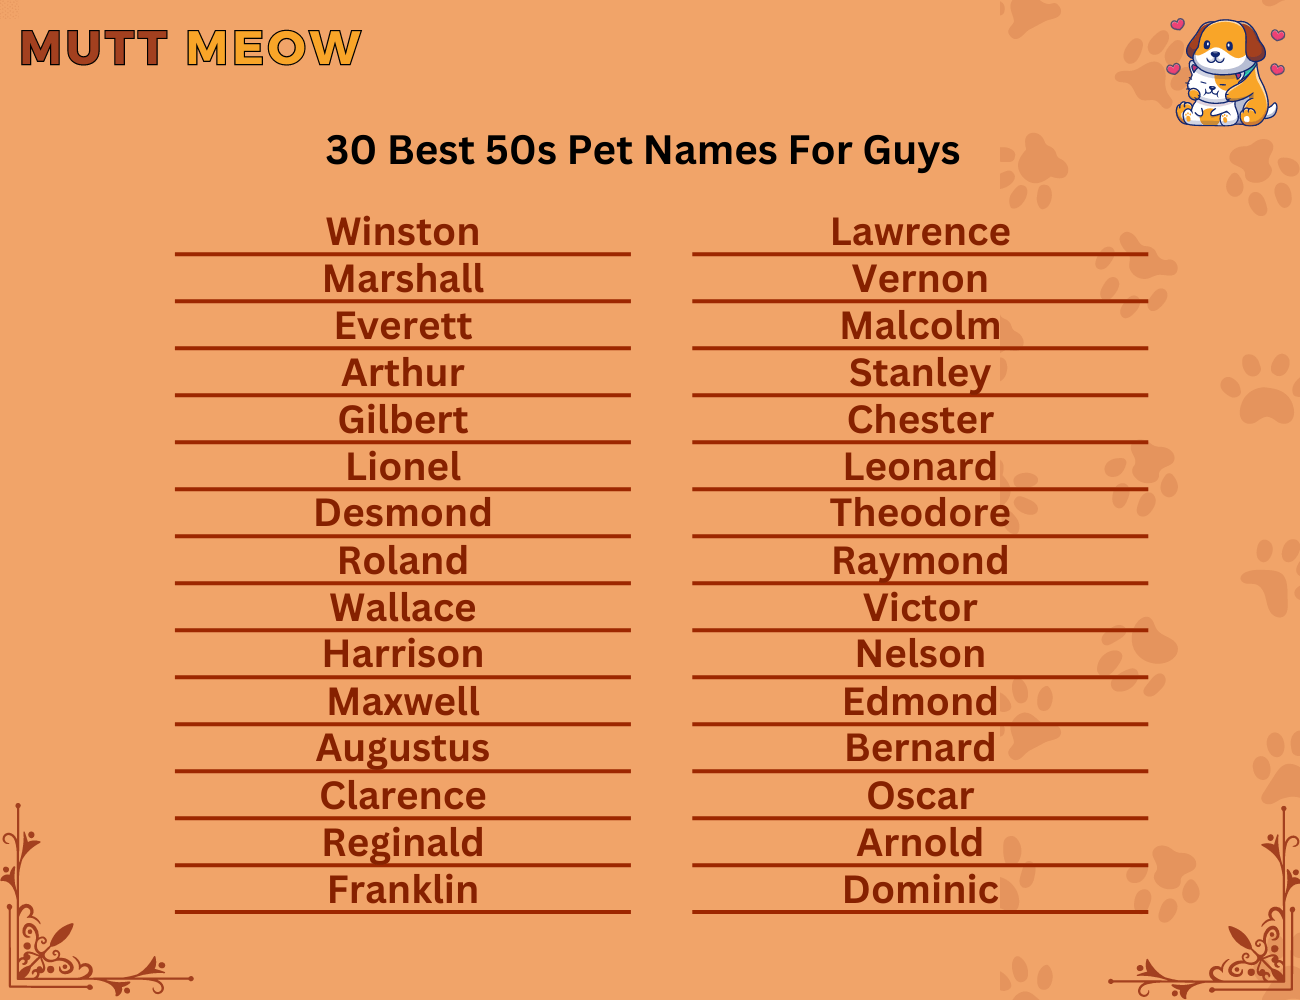 30 Best 50s Pet Names For Guys